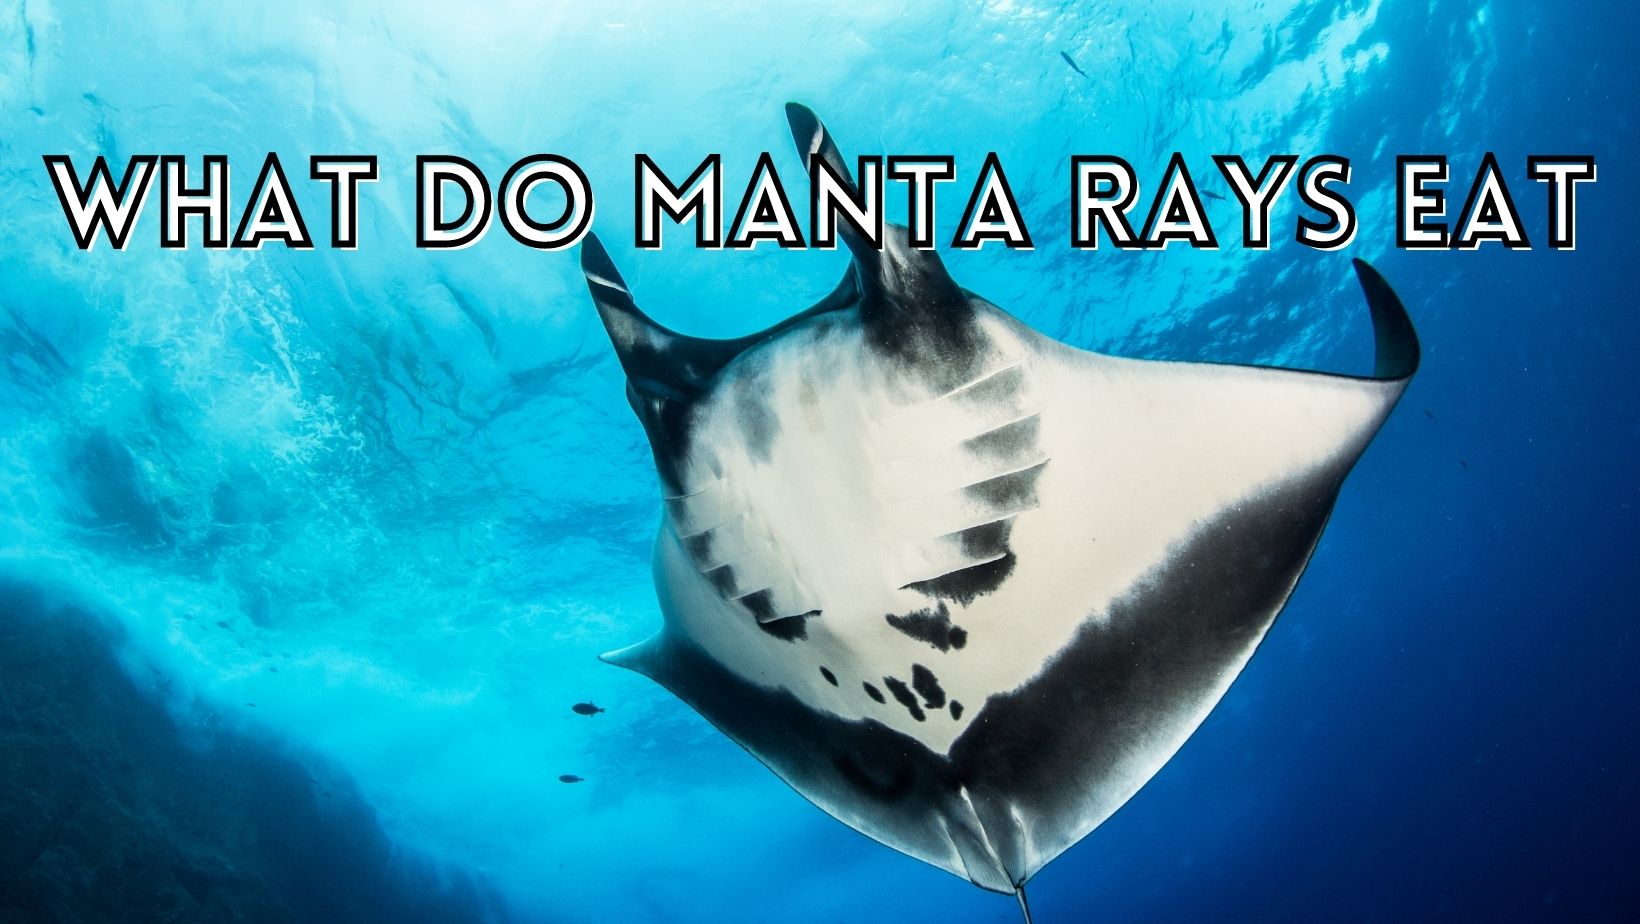 What do manta rays eat